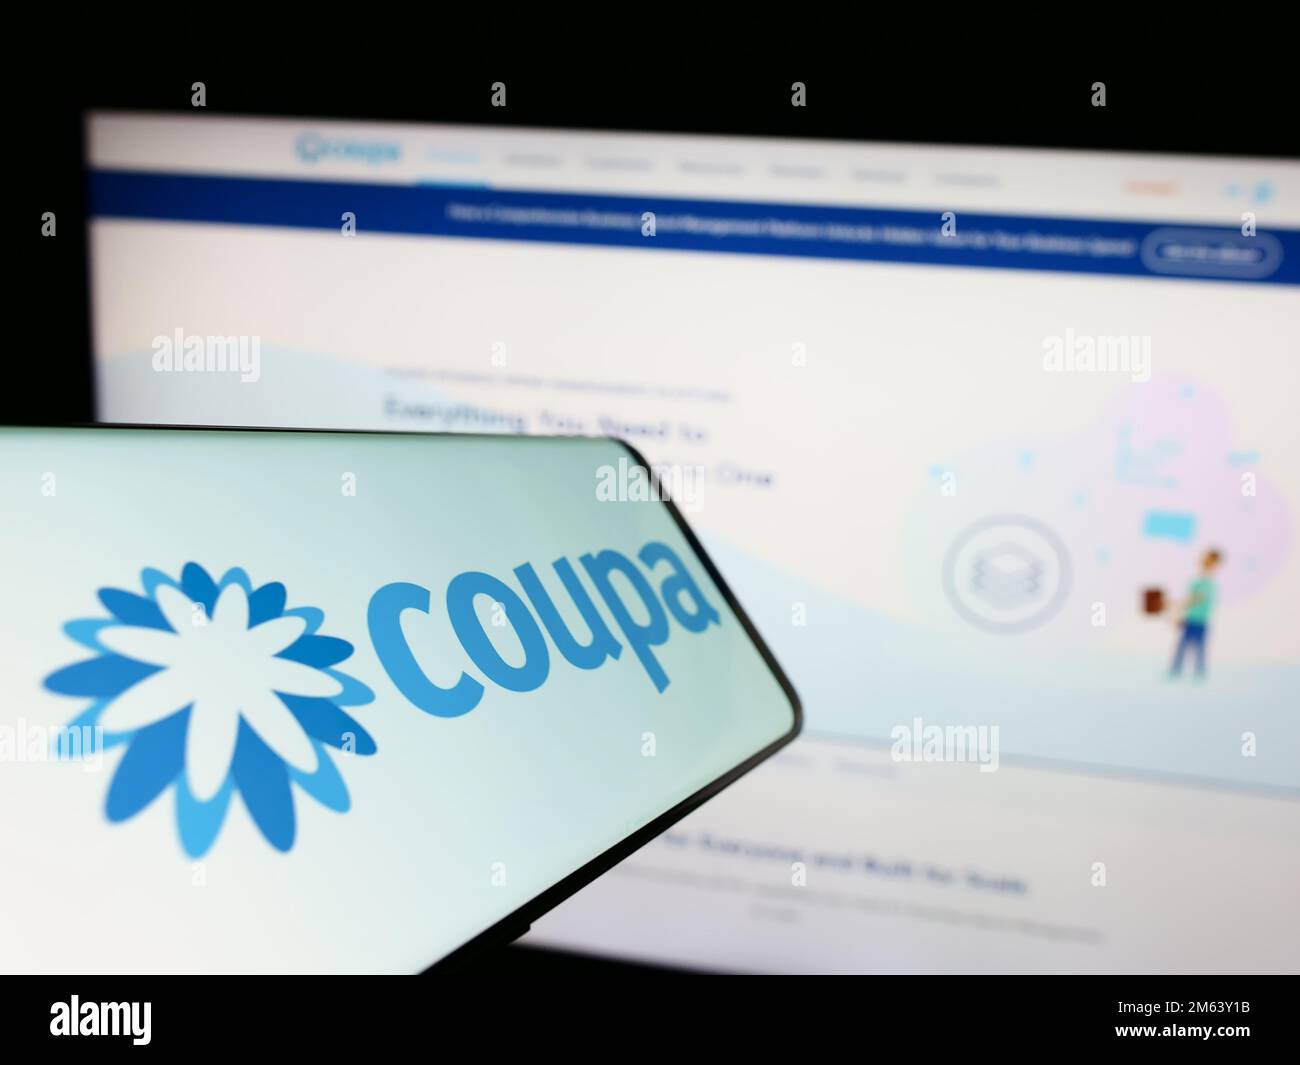 Mobile phone with logo of spend management company Coupa Software Inc. on screen in front of business website. Focus on center of phone display. Stock Photo